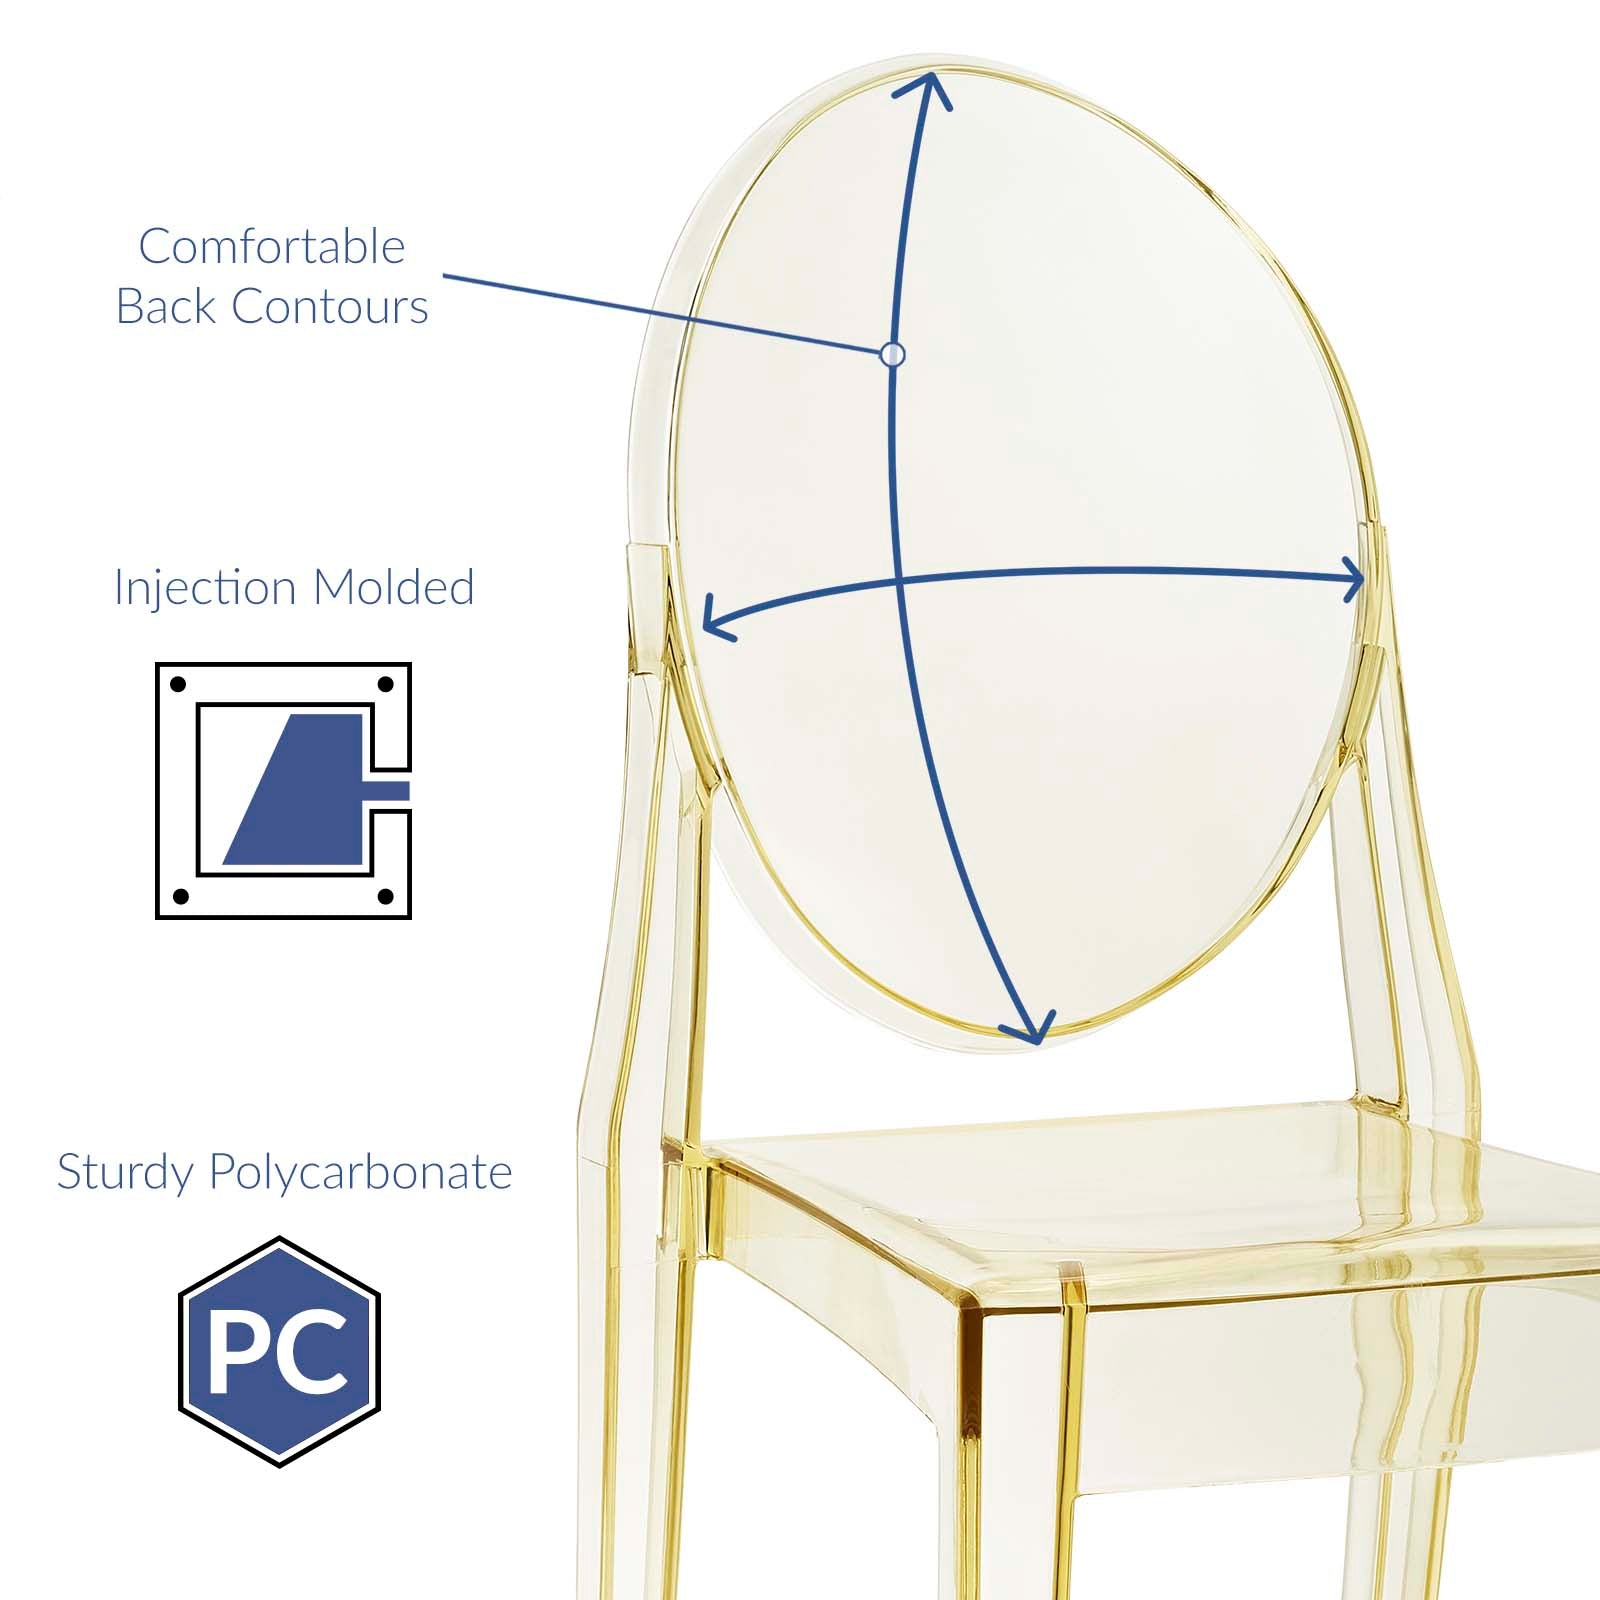 Casper Dining Side Chair-Dining Chair-Modway-Wall2Wall Furnishings